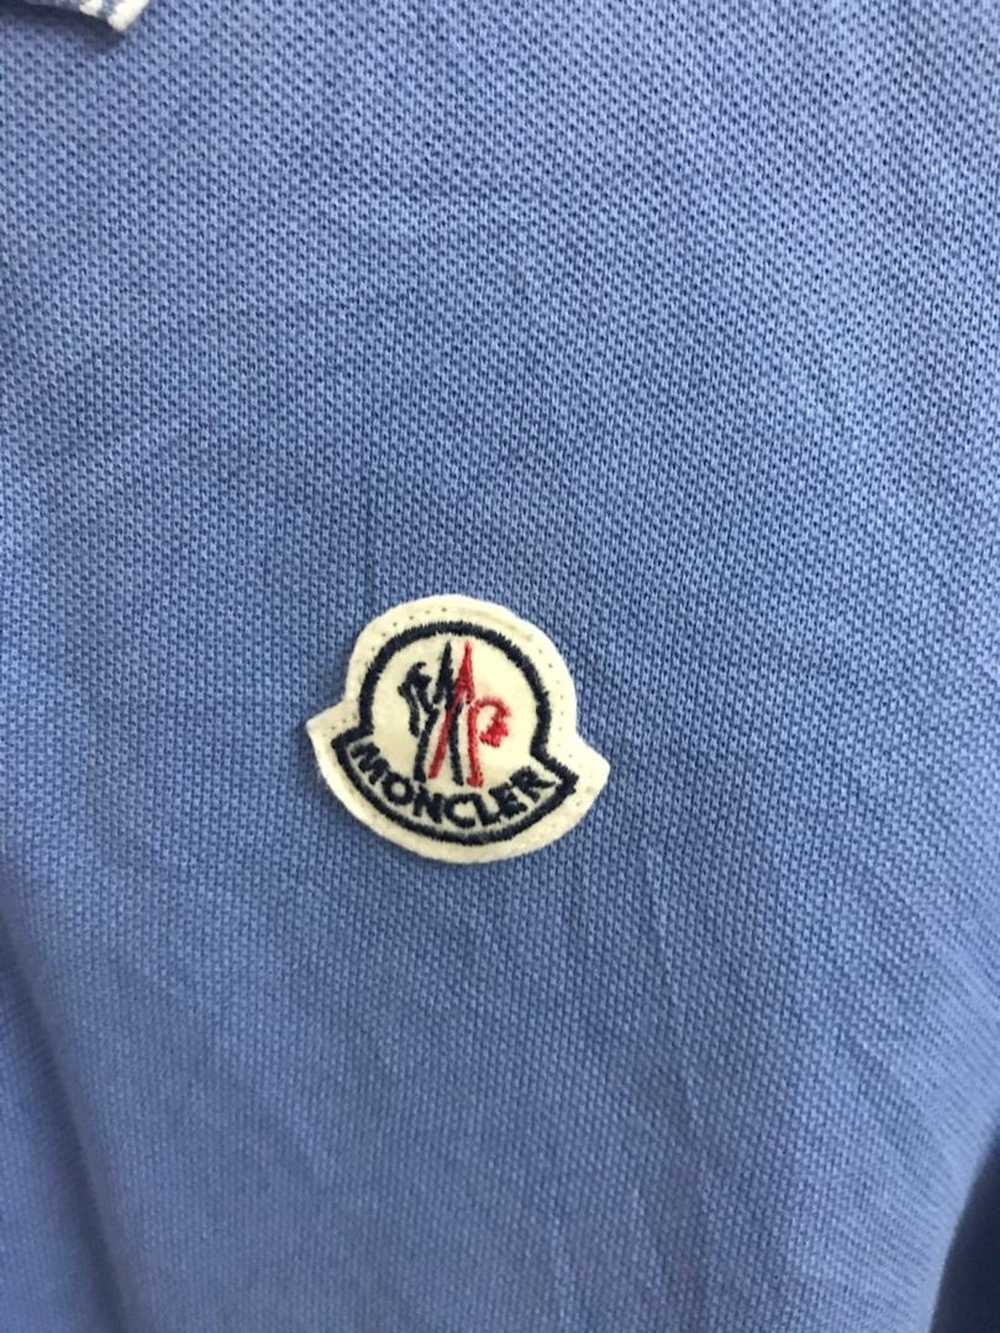 Moncler Need Gone Today Moncler Polo Slim Fit Siz… - image 5